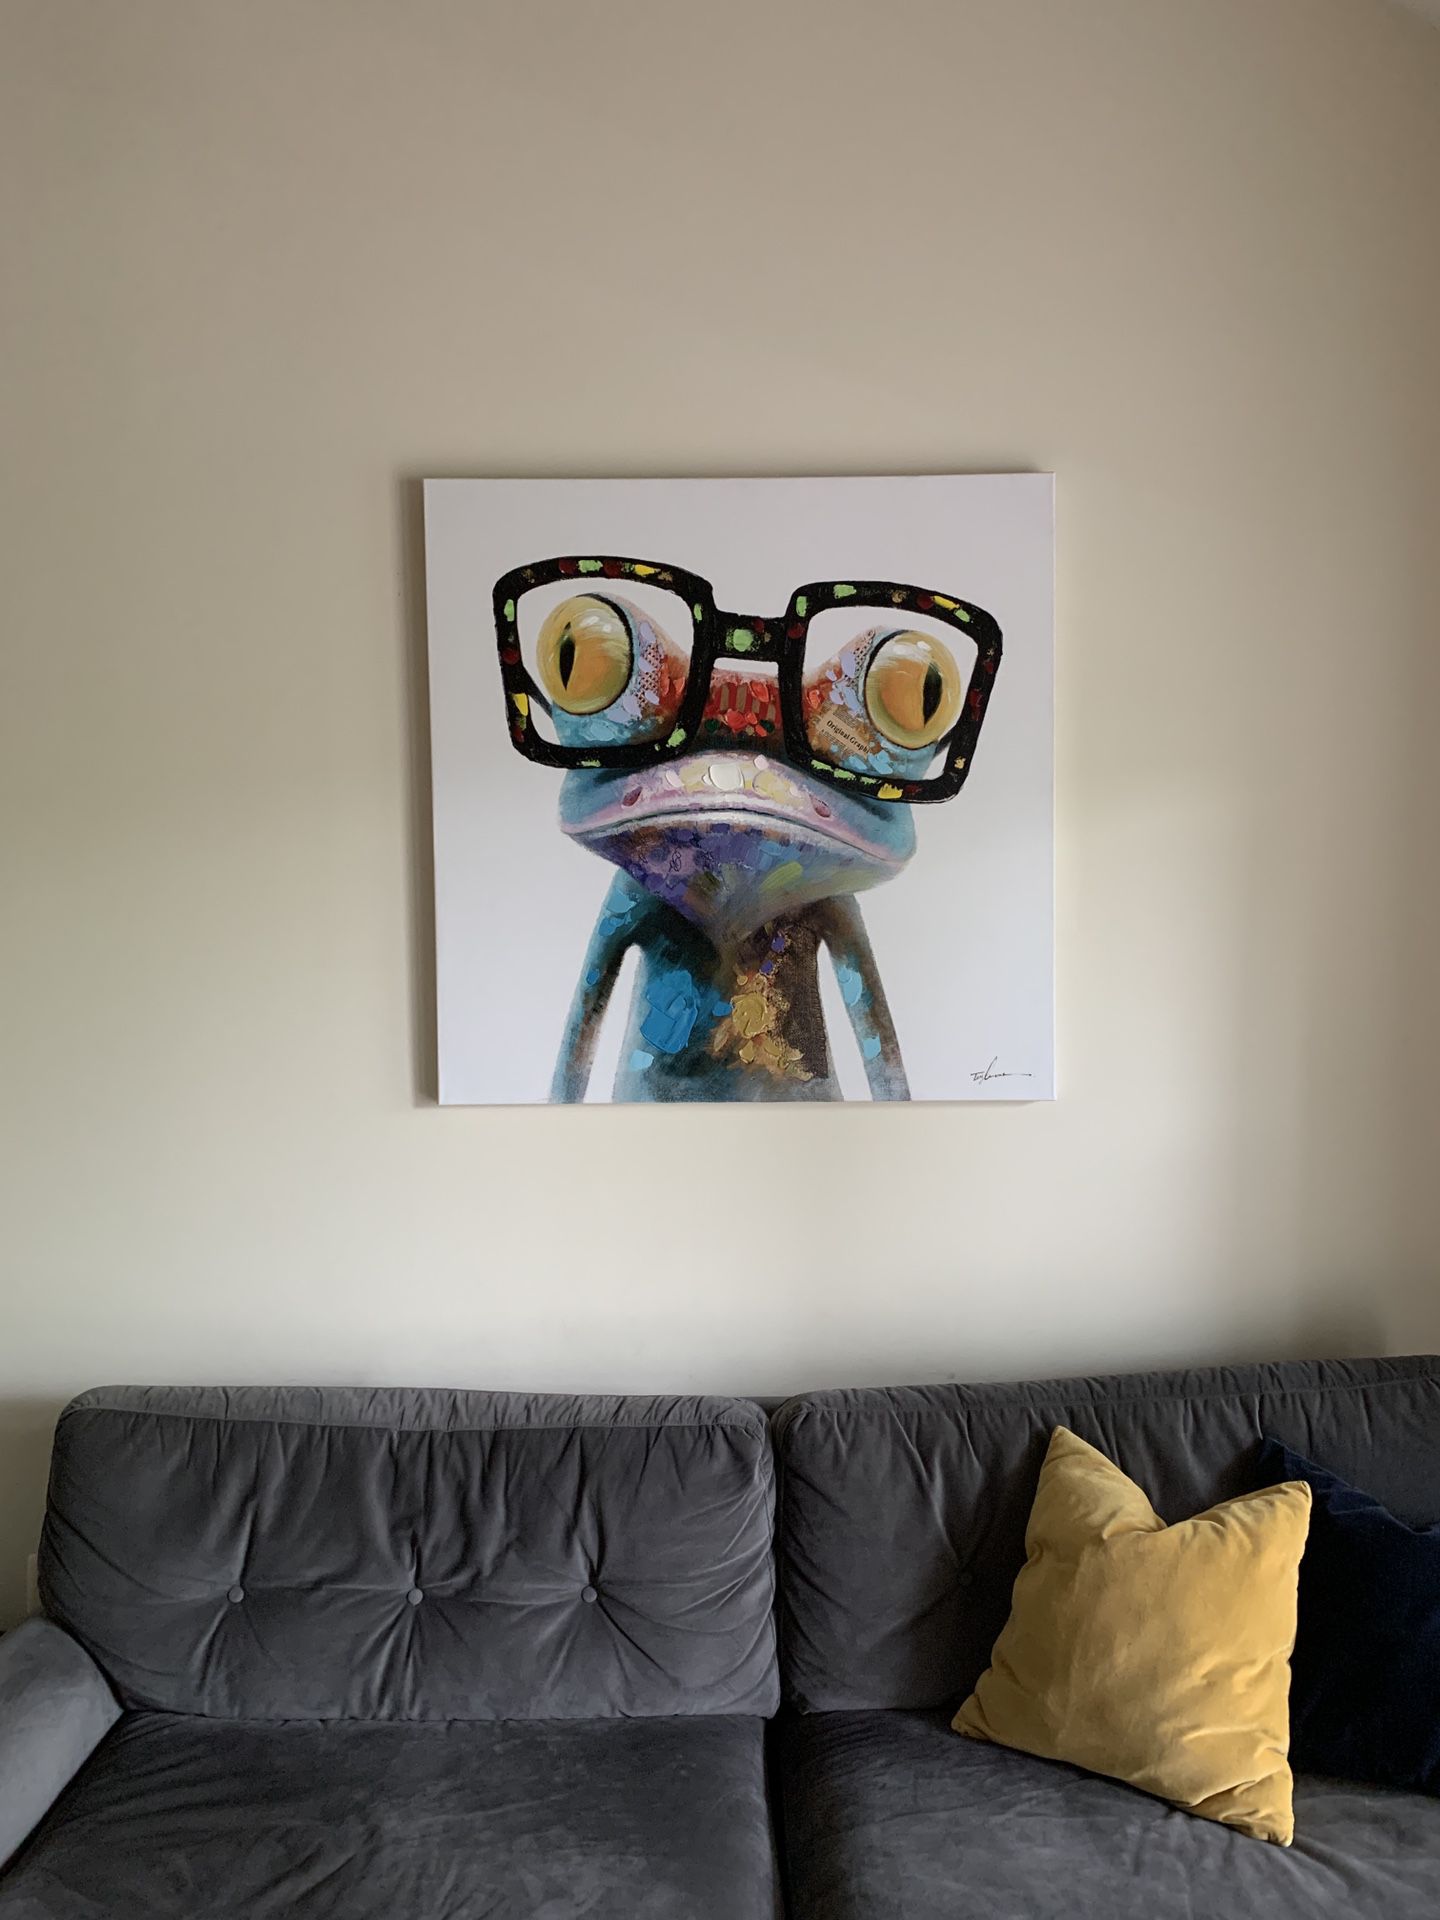 Happy Frog Wearing Glasses Cartoon Animal Handpainted Oil Painting On Canvas Modern Abstract Wall Art Bedroom Decoration